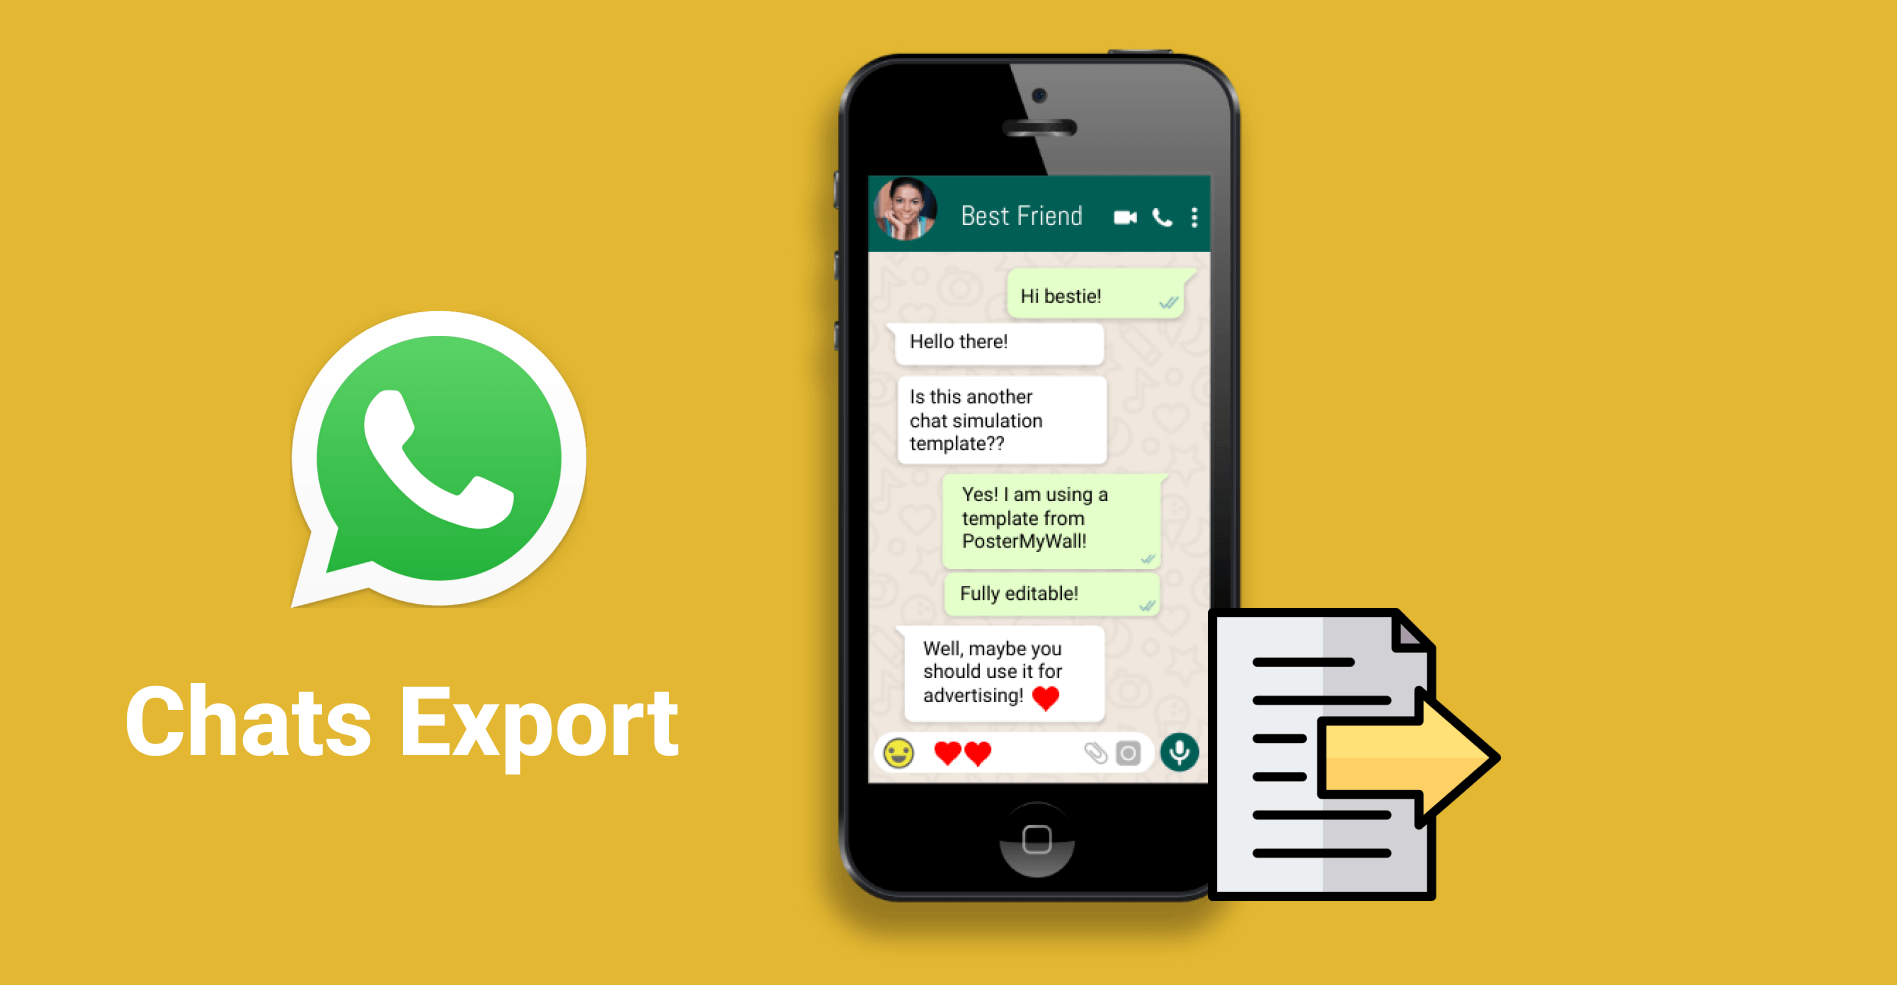 Chat Export